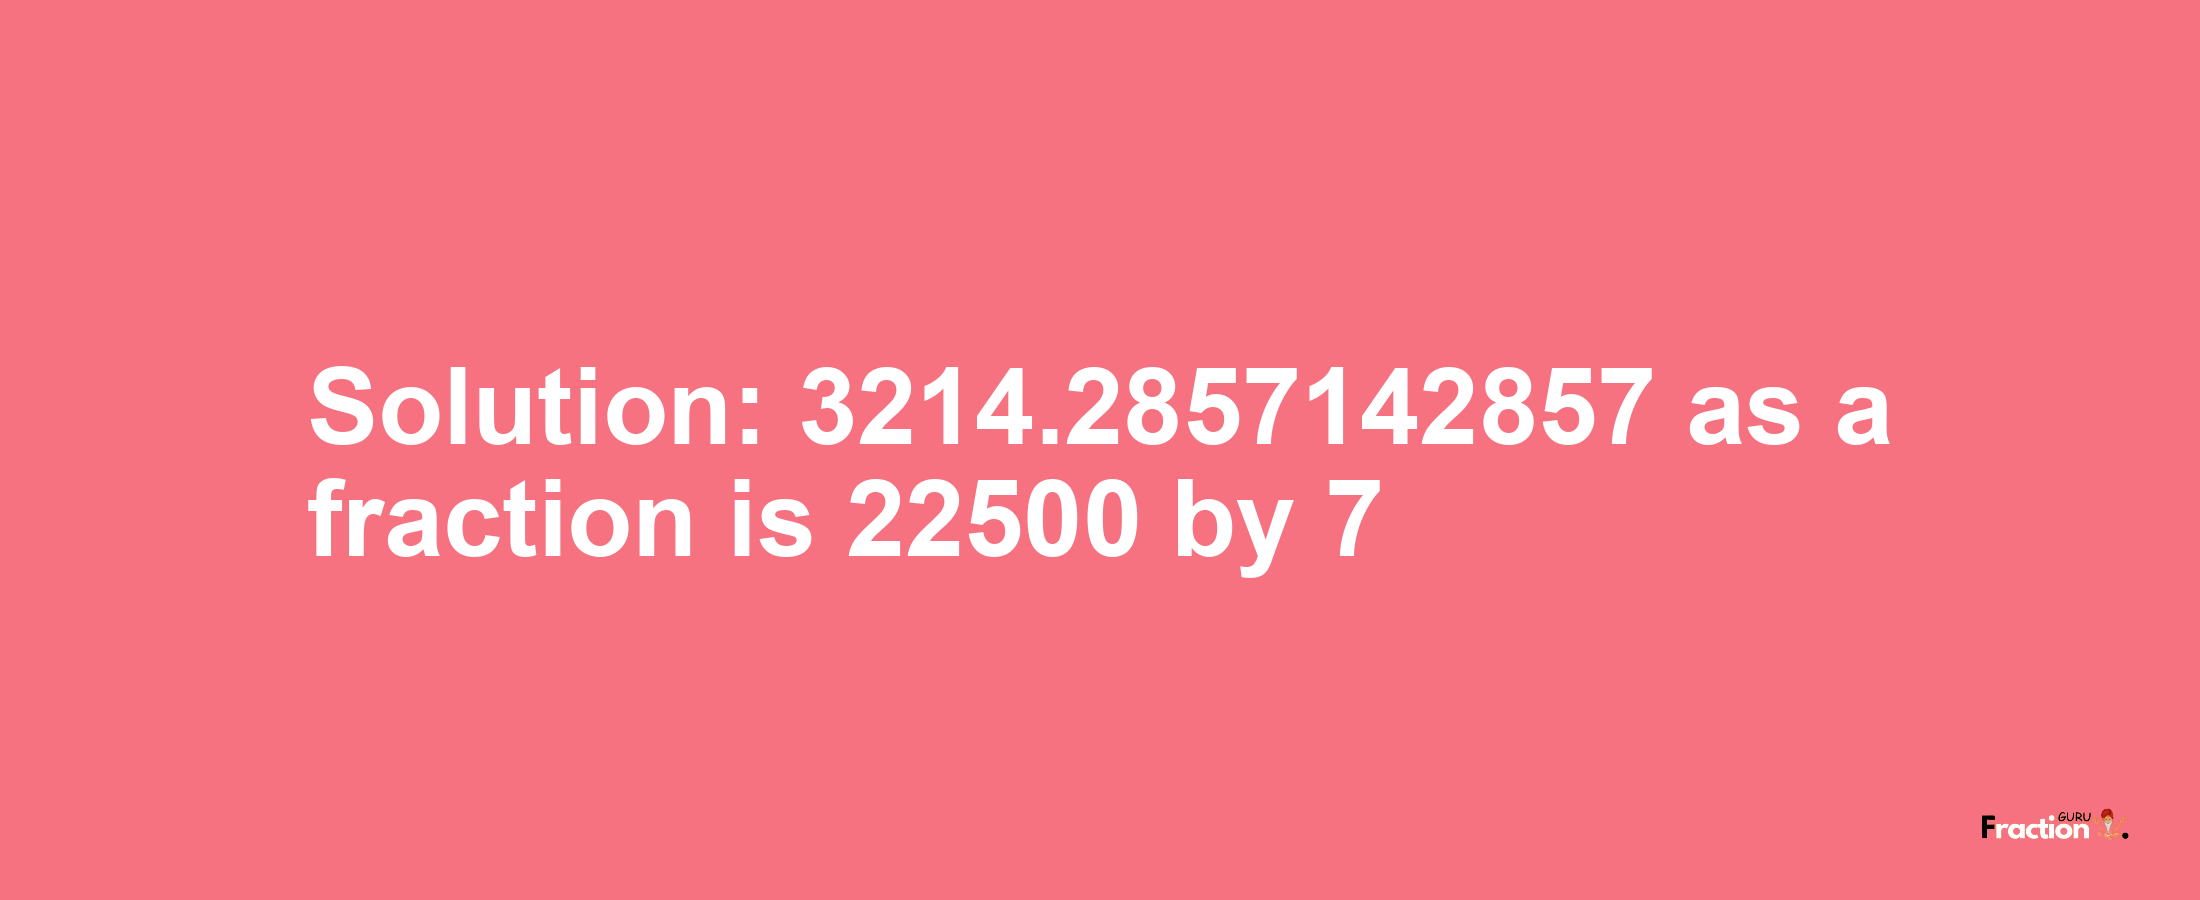 Solution:3214.2857142857 as a fraction is 22500/7